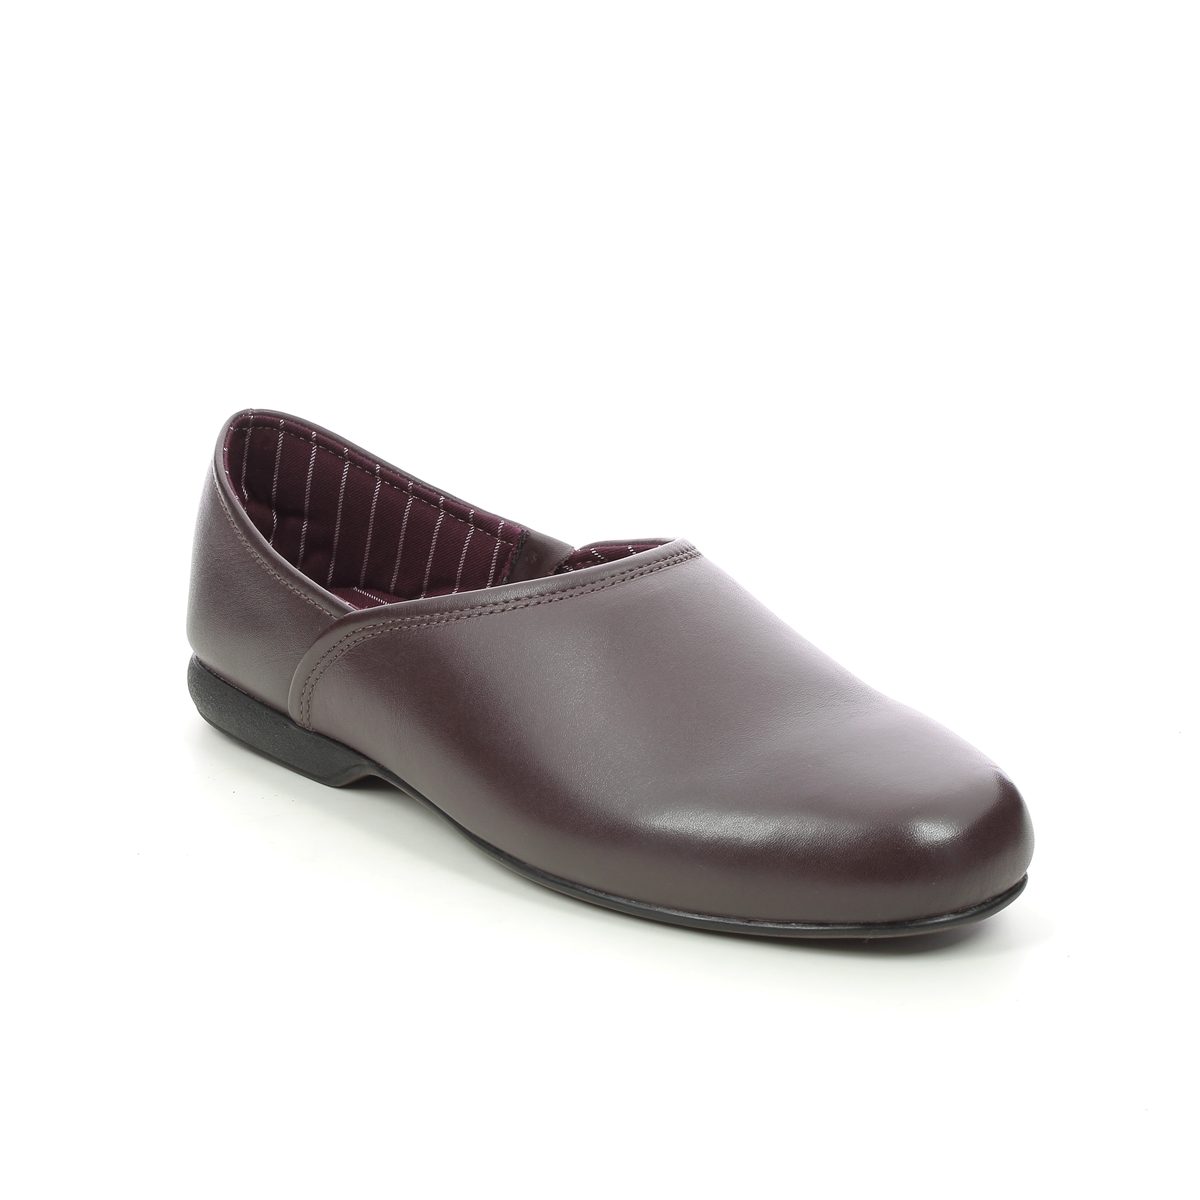 Clarks Harston Elite Burgundy Leather Mens Slippers 447217G In Size 8 In Plain Burgundy Leather G Width Fitting